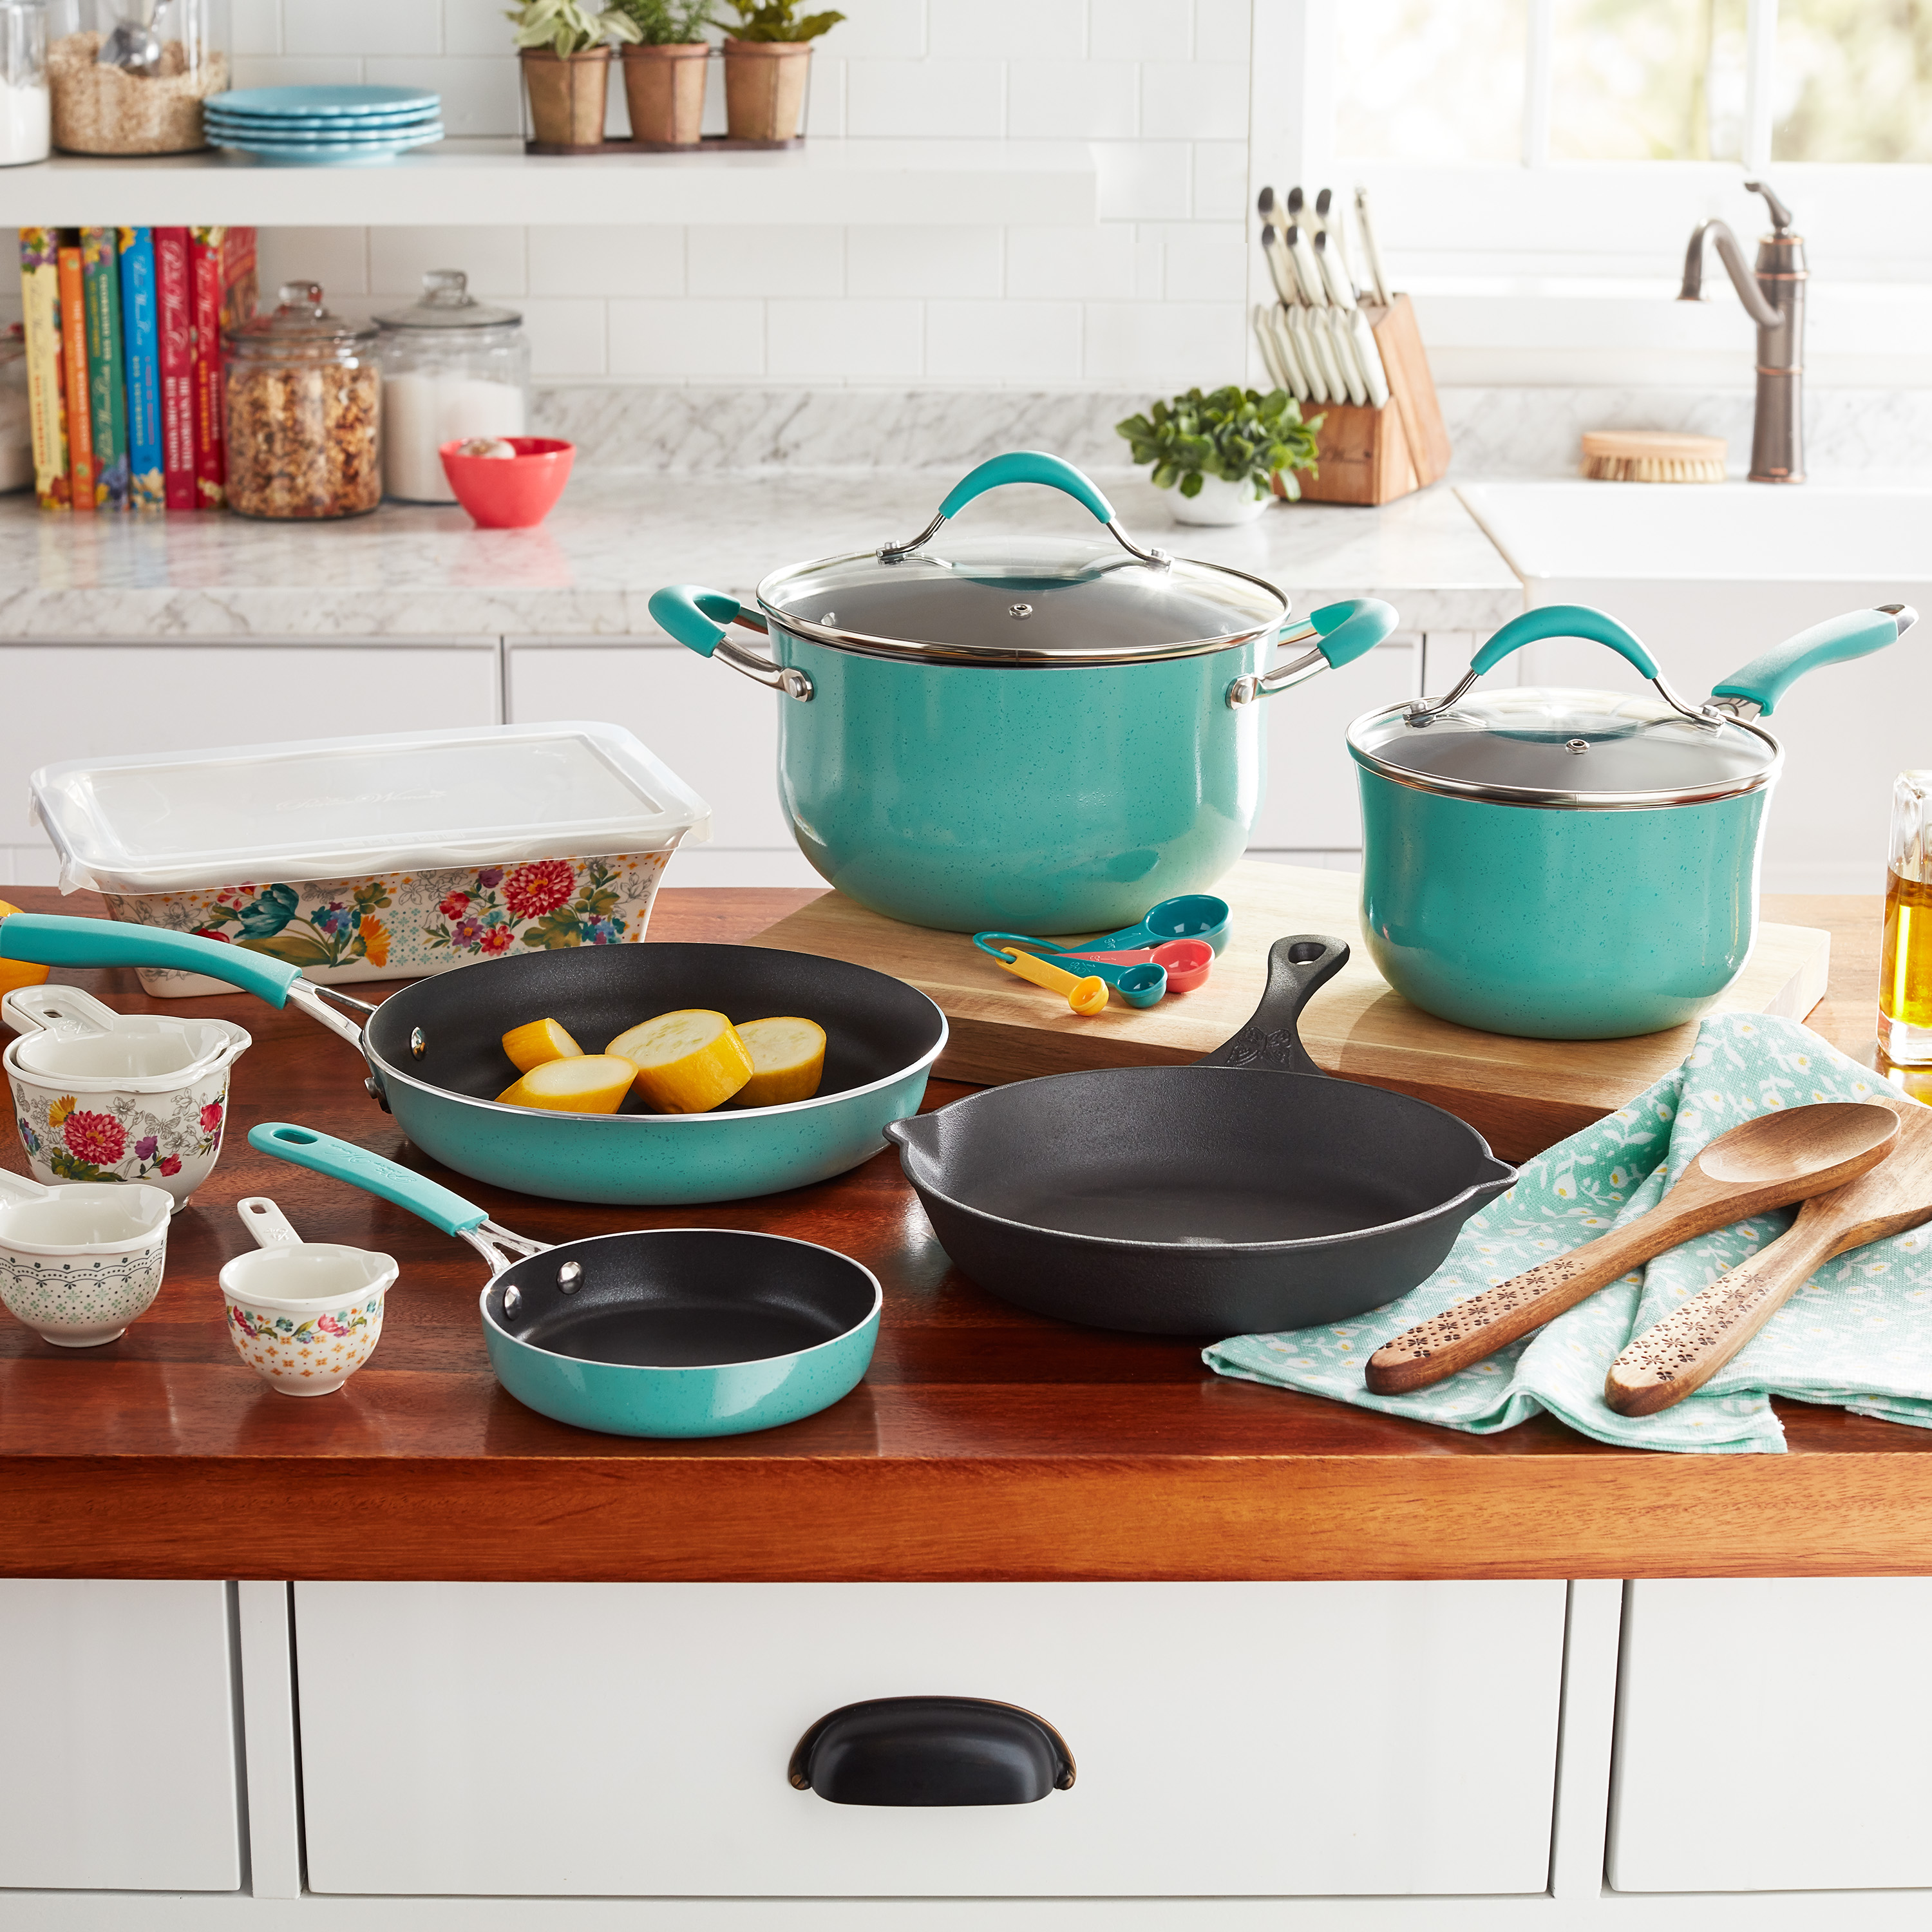 The Pioneer Woman Blooming Bouquet Aluminum Nonstick 19-Piece Cookware Set, Teal - image 6 of 11